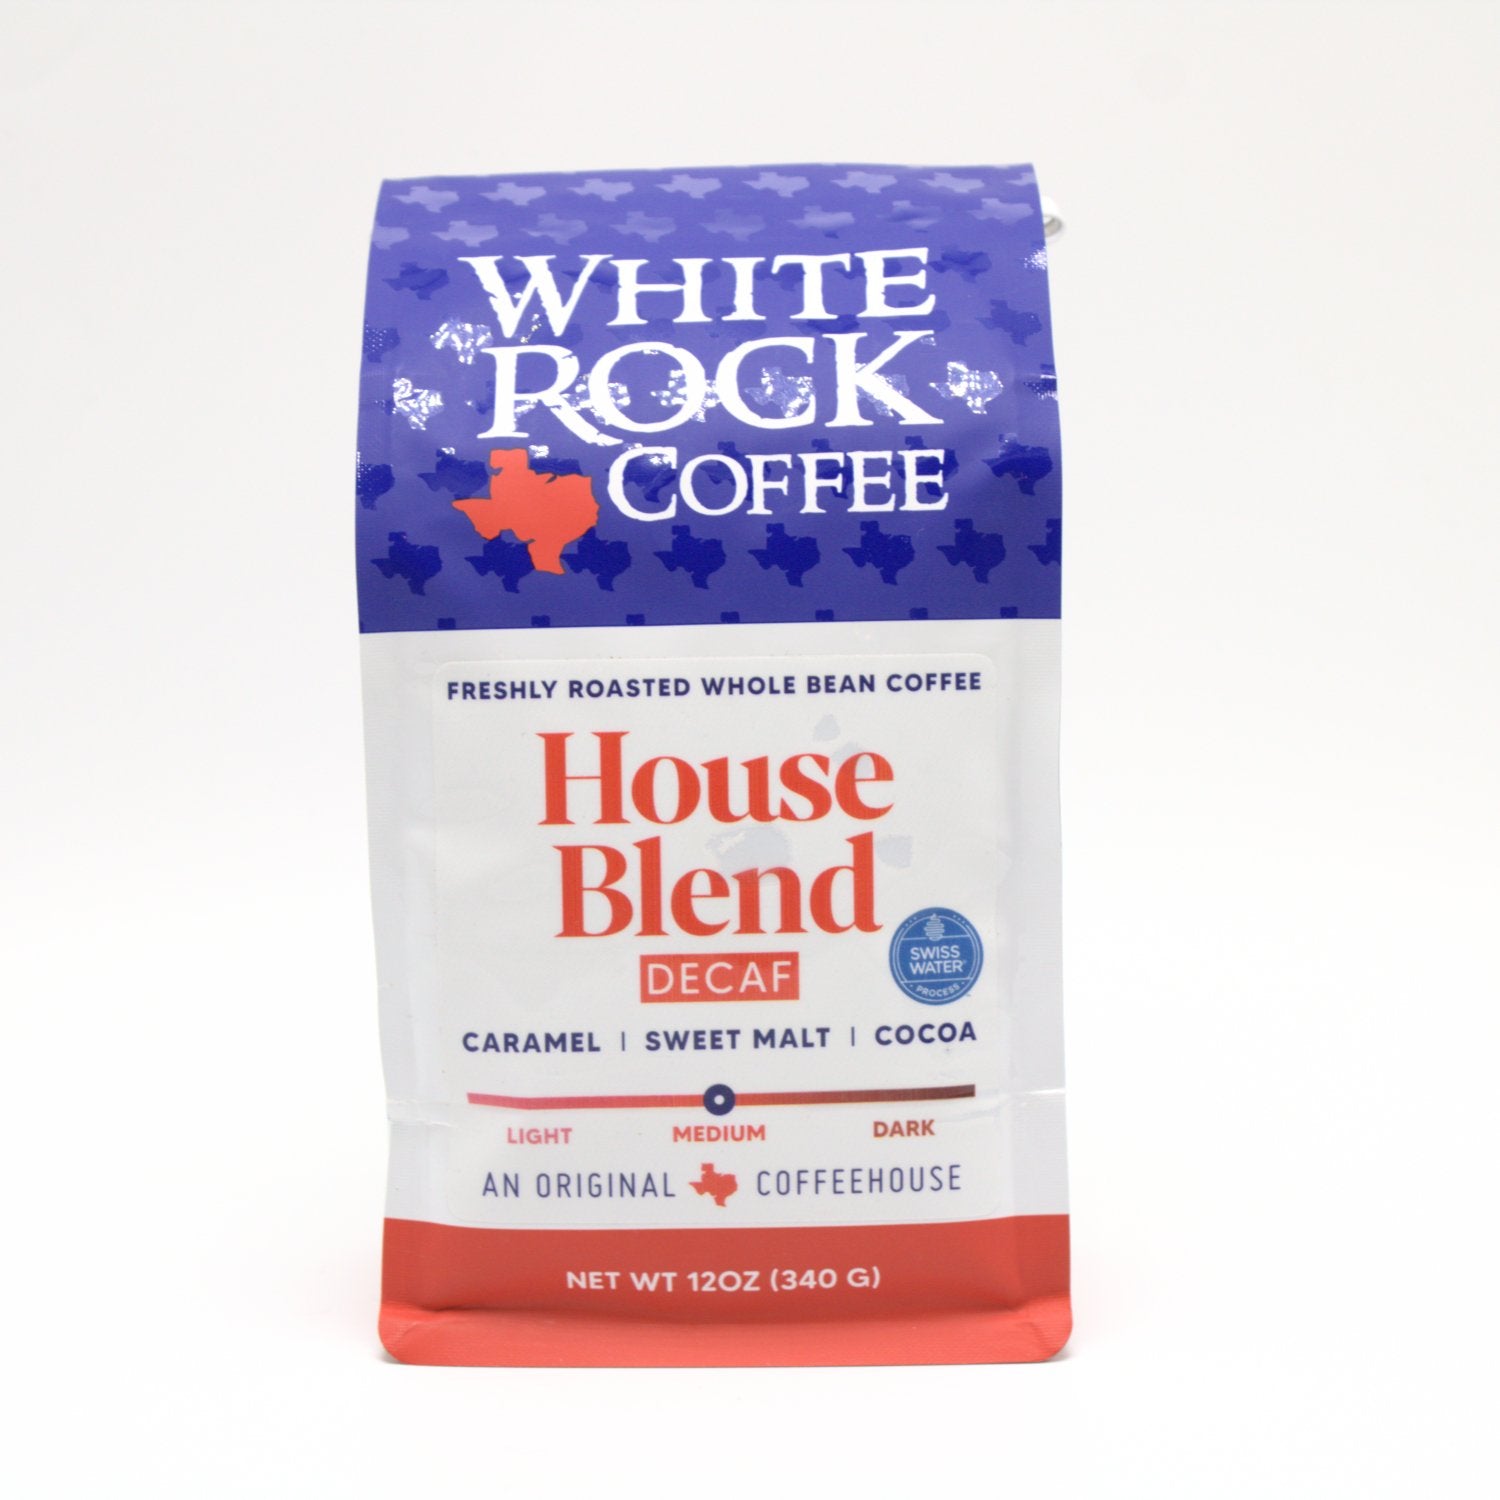 Decaf House Blend - White Rock Coffee